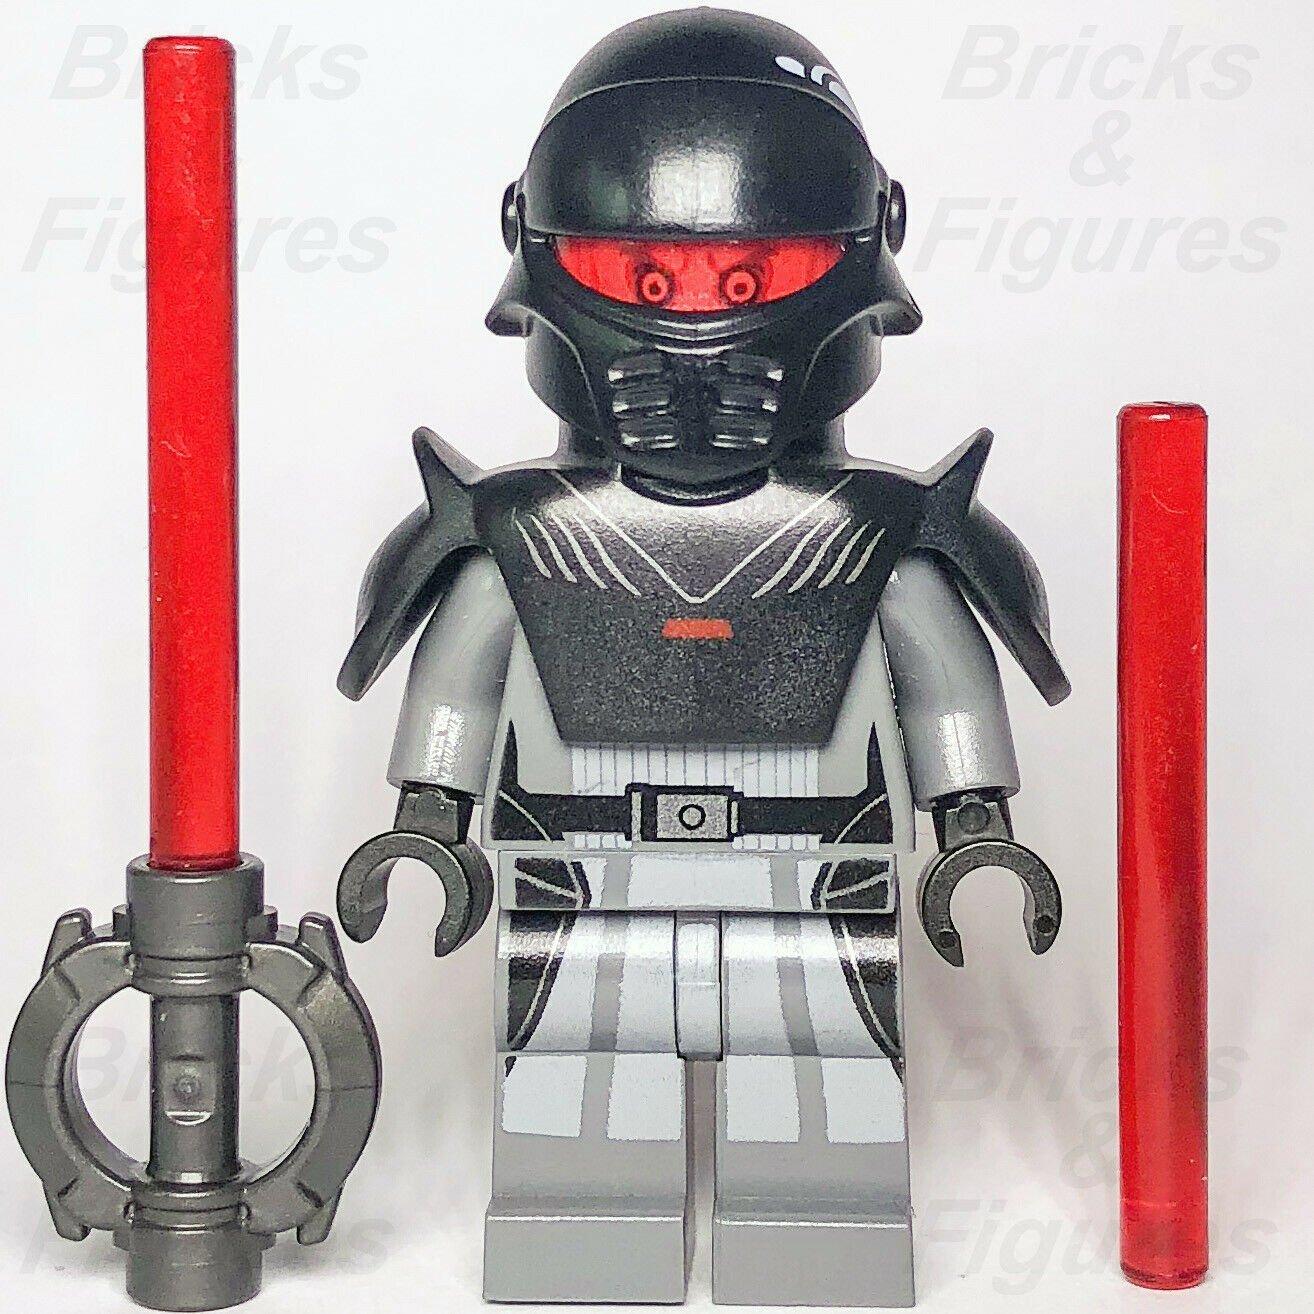 New Star Wars LEGO Imperial Grand Inquisitor Sith Rebels Minifigure 75082 - Bricks & Figures